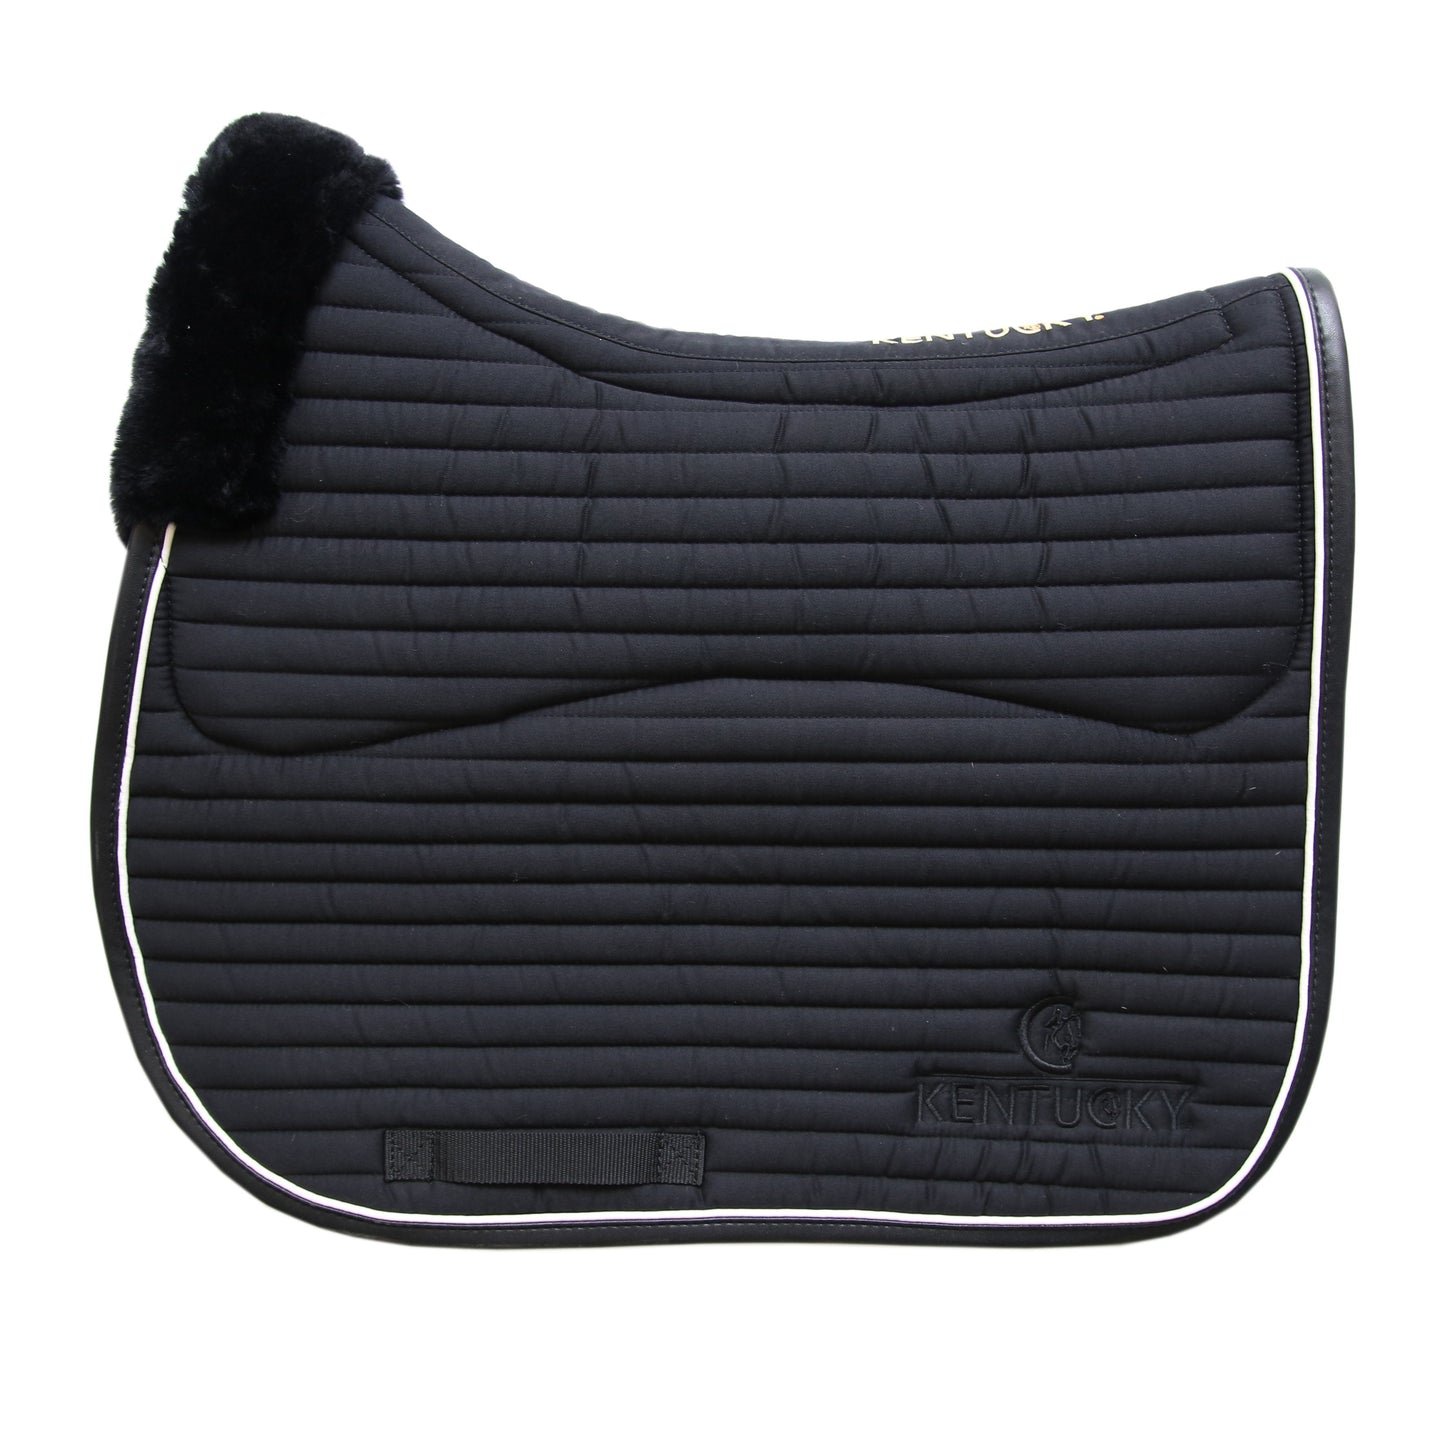 Kentucky Skin Friendly Saddle Pad-Trailrace Equestrian Outfitters-The Equestrian